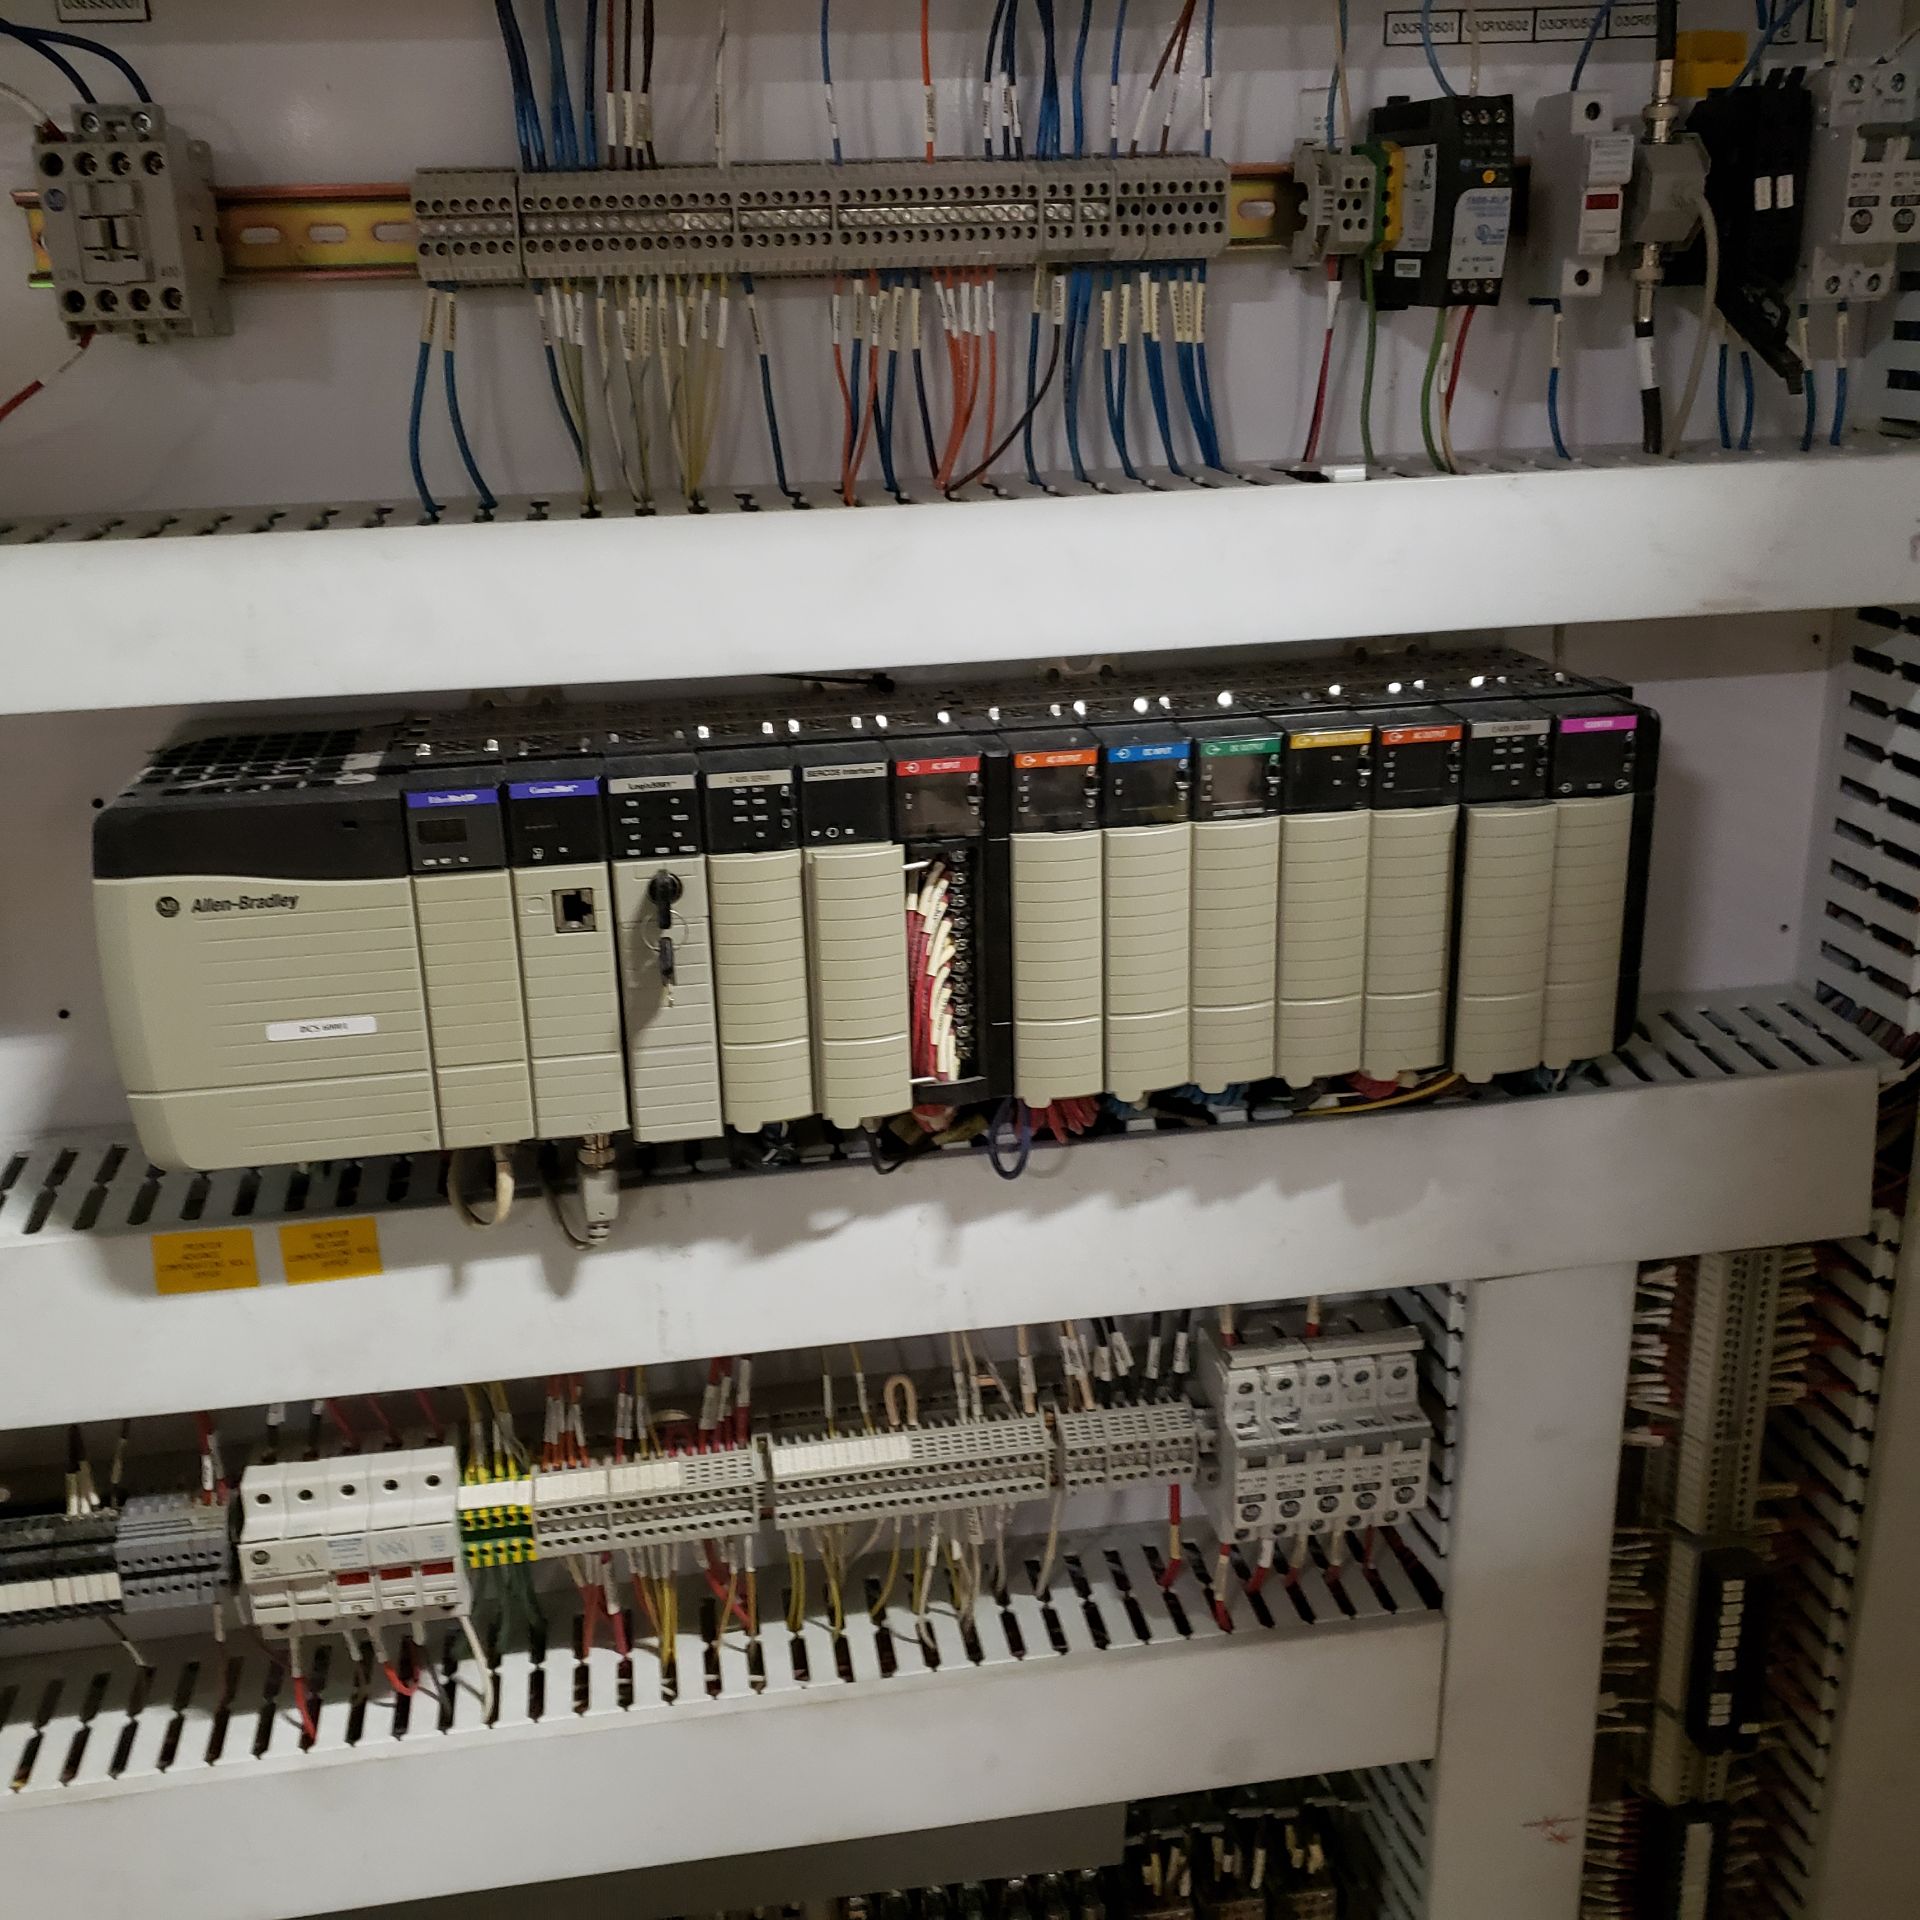 ELECTRICAL DRIVE CABINET FOR PRINTER EMBOSSER, BACKSTANDS, PLC, WITH CABLE TRAY AND CABLES (H2 - Image 11 of 24